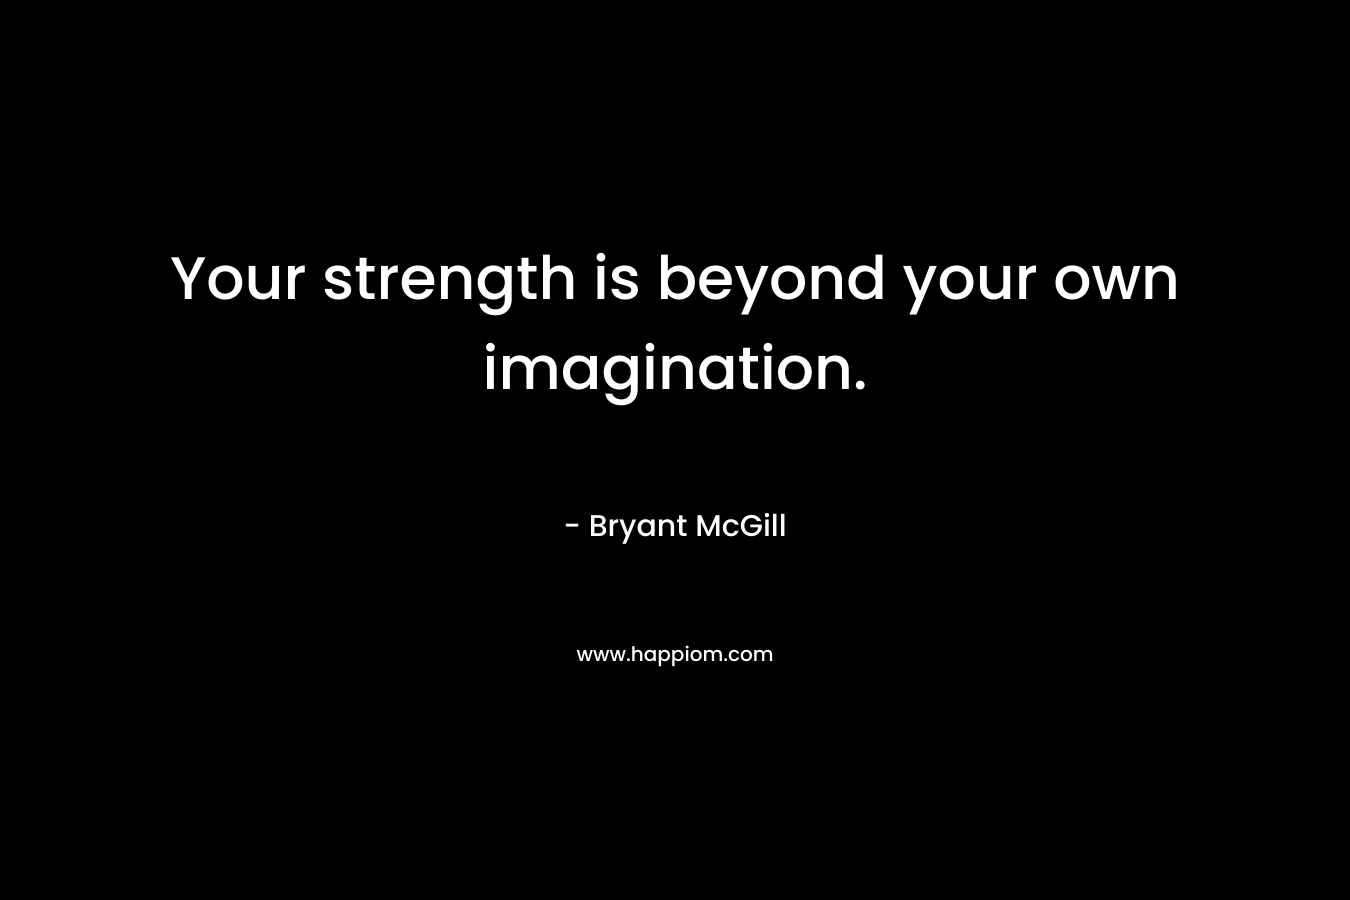 Your strength is beyond your own imagination.